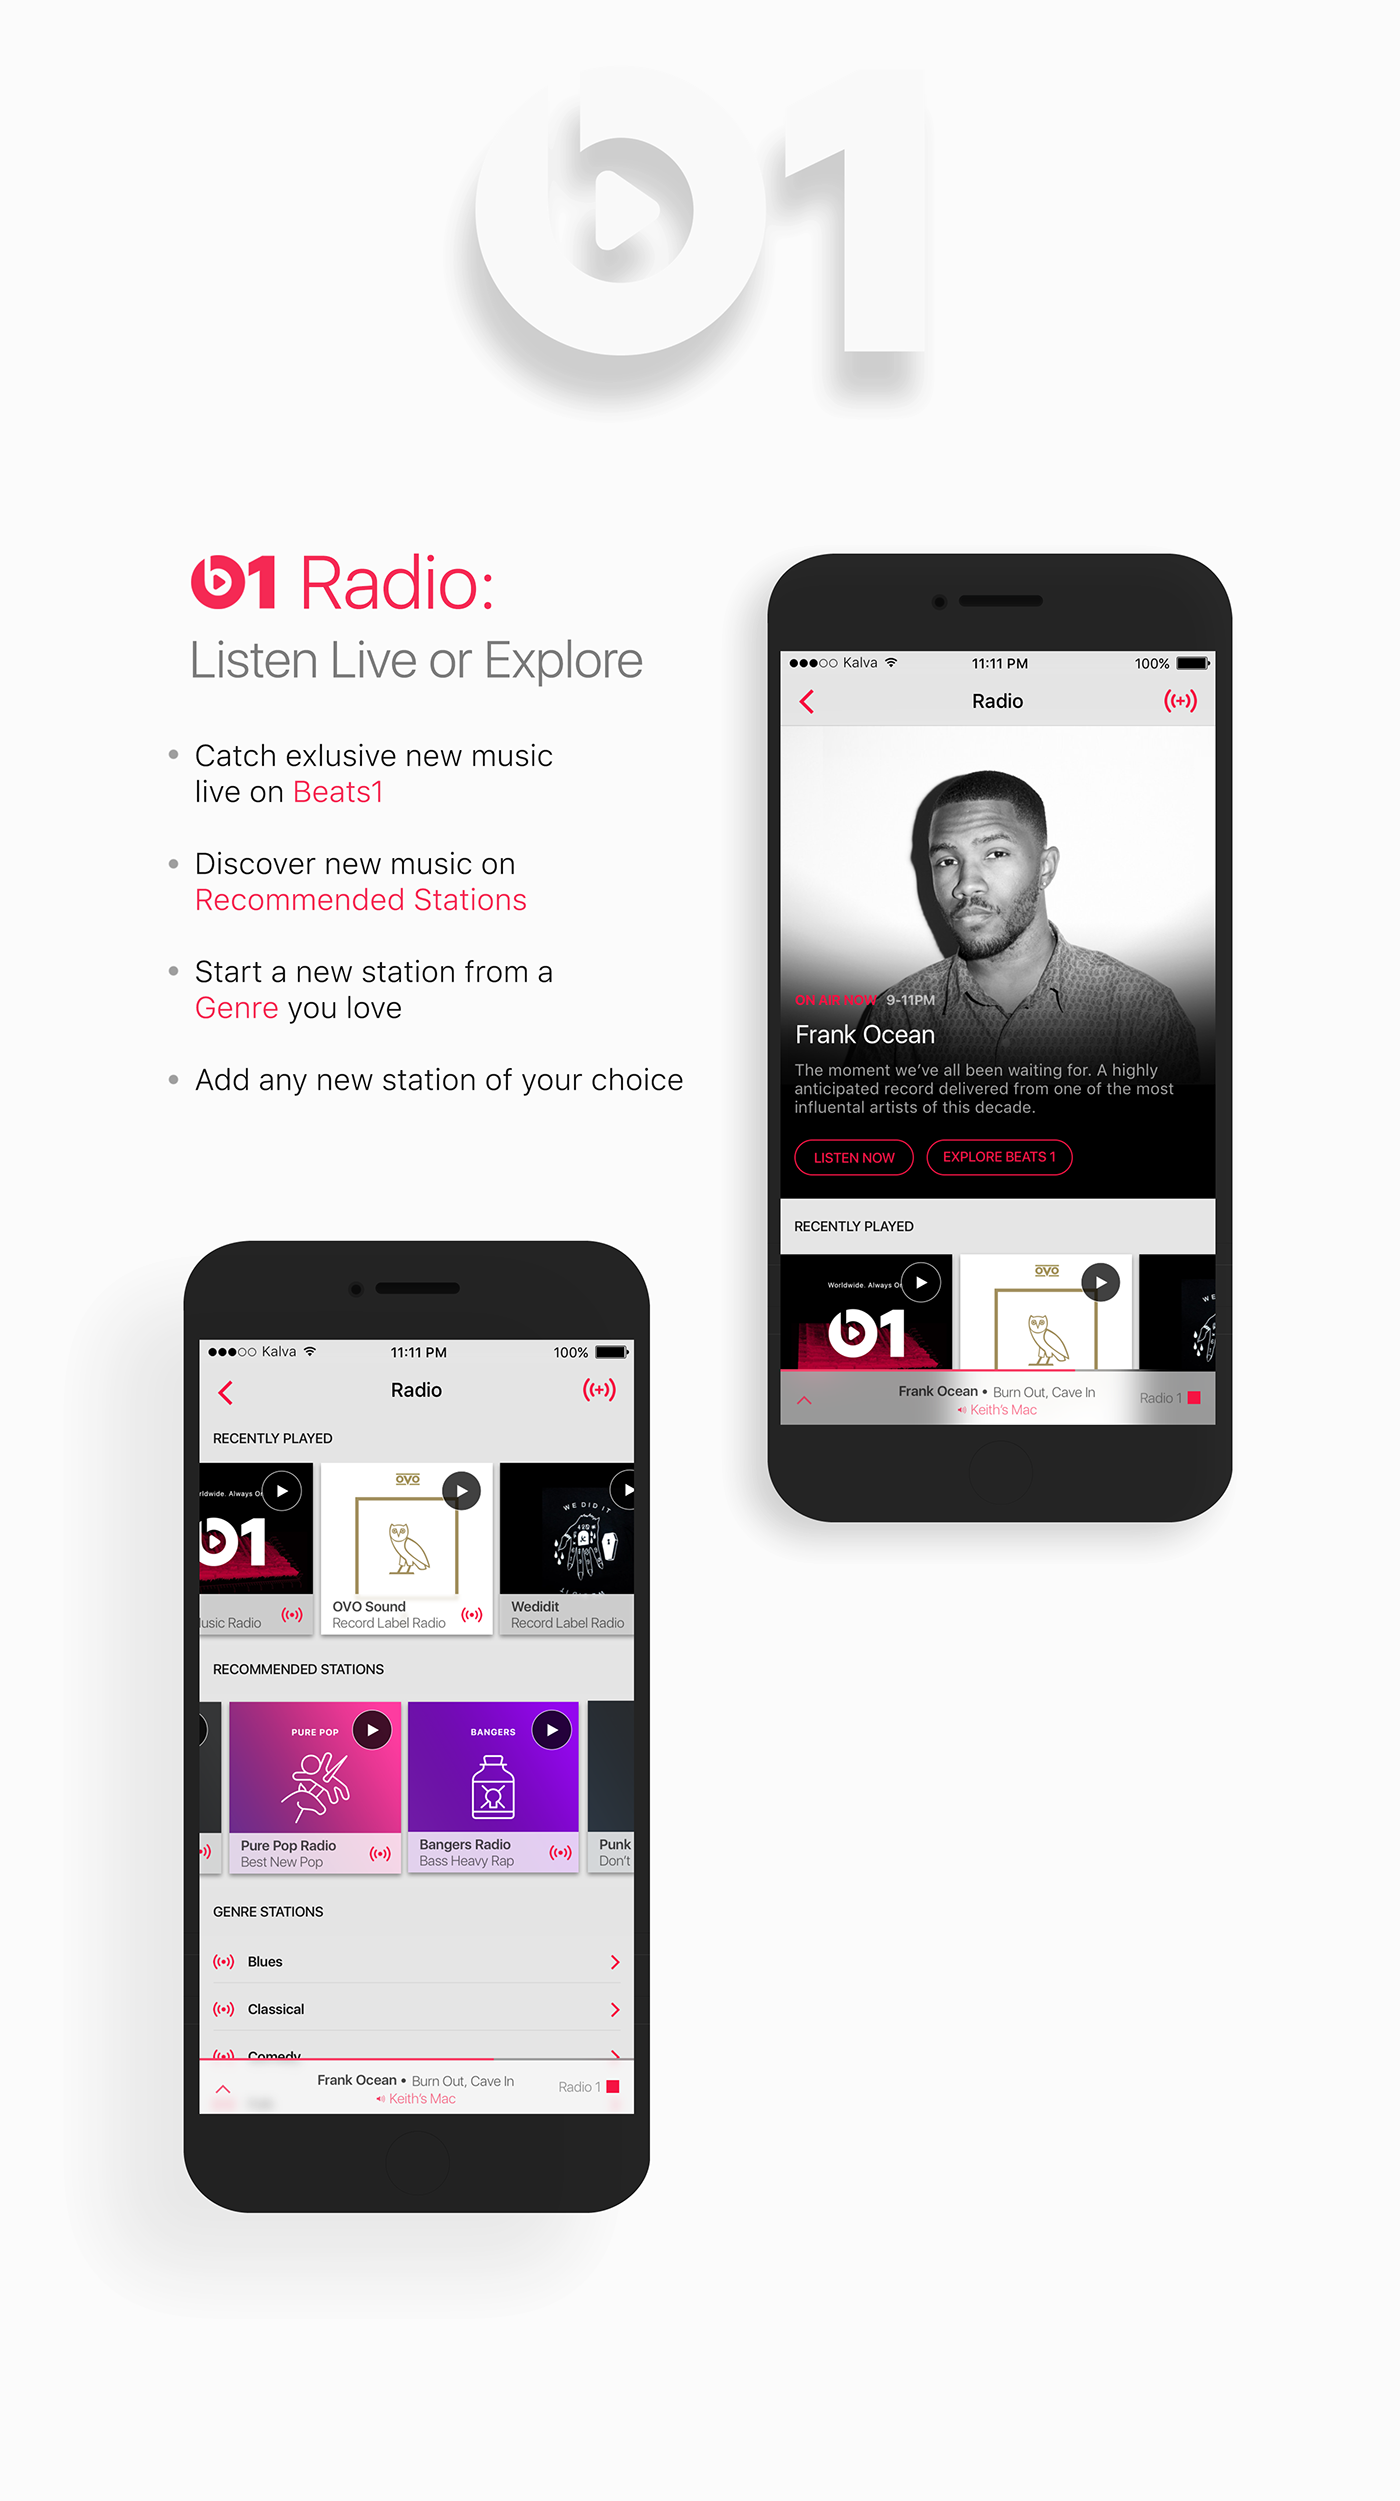 ux UI user interface experience design app design Apple Music spotify music streaming concept